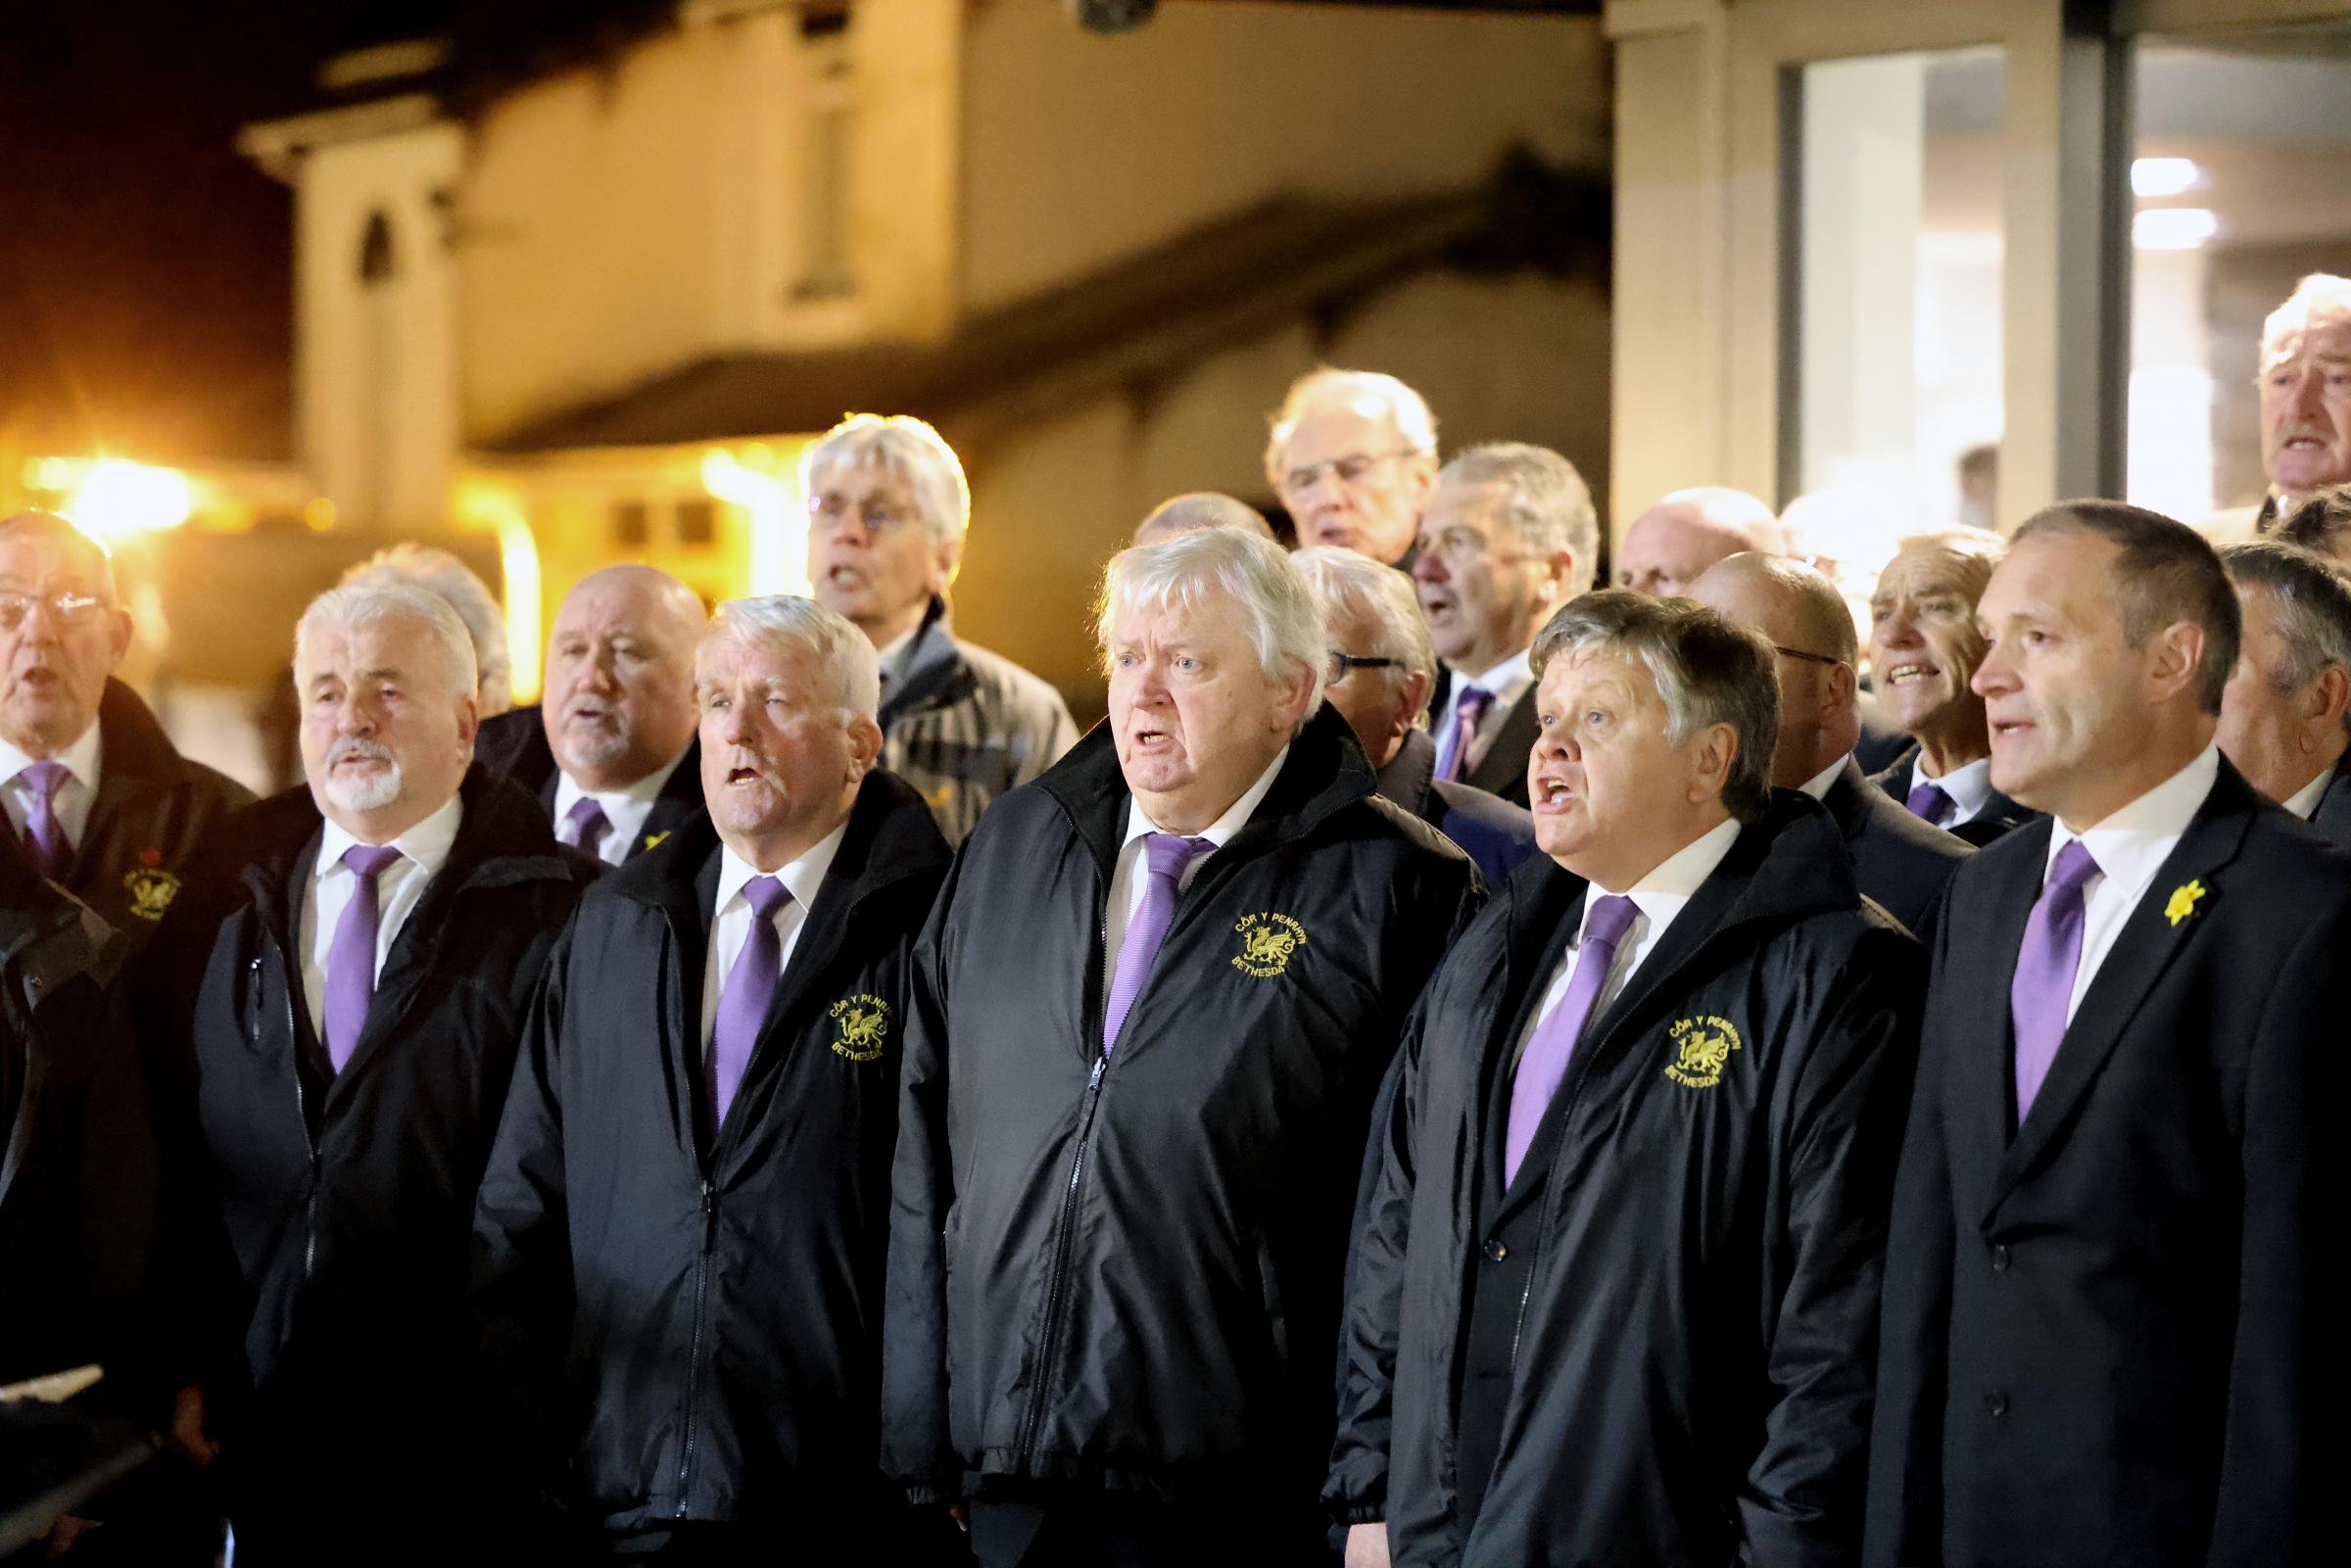 Launch of the farmers market at Aber Falls - Penrhyn Male Voice Choir.